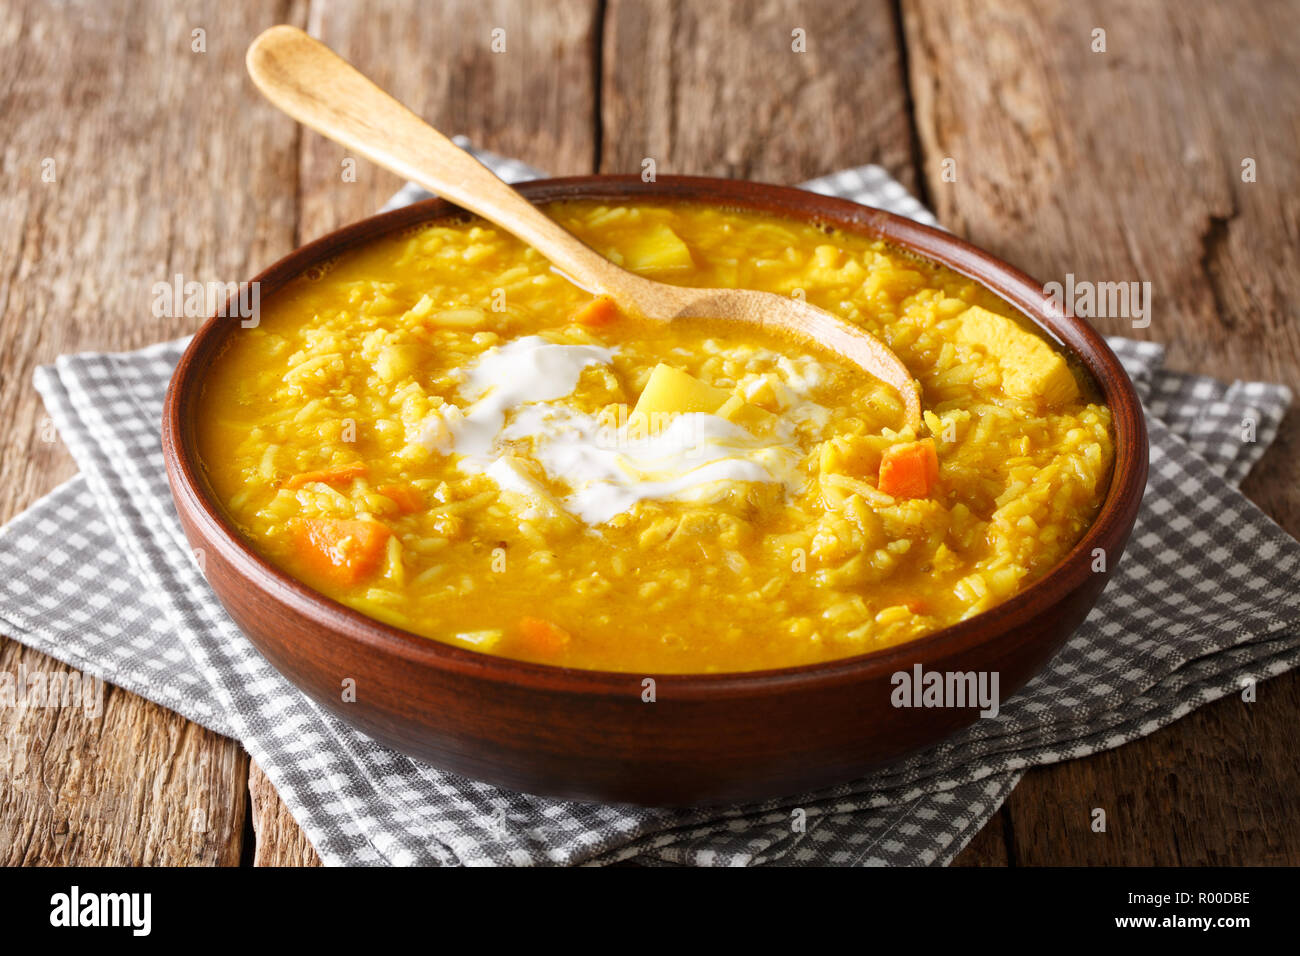 Delicious Tamil Mulligatawny soup with lentils, rice, chicken, vegetables and apple closeup in a bowl on the table. horizontal Stock Photo